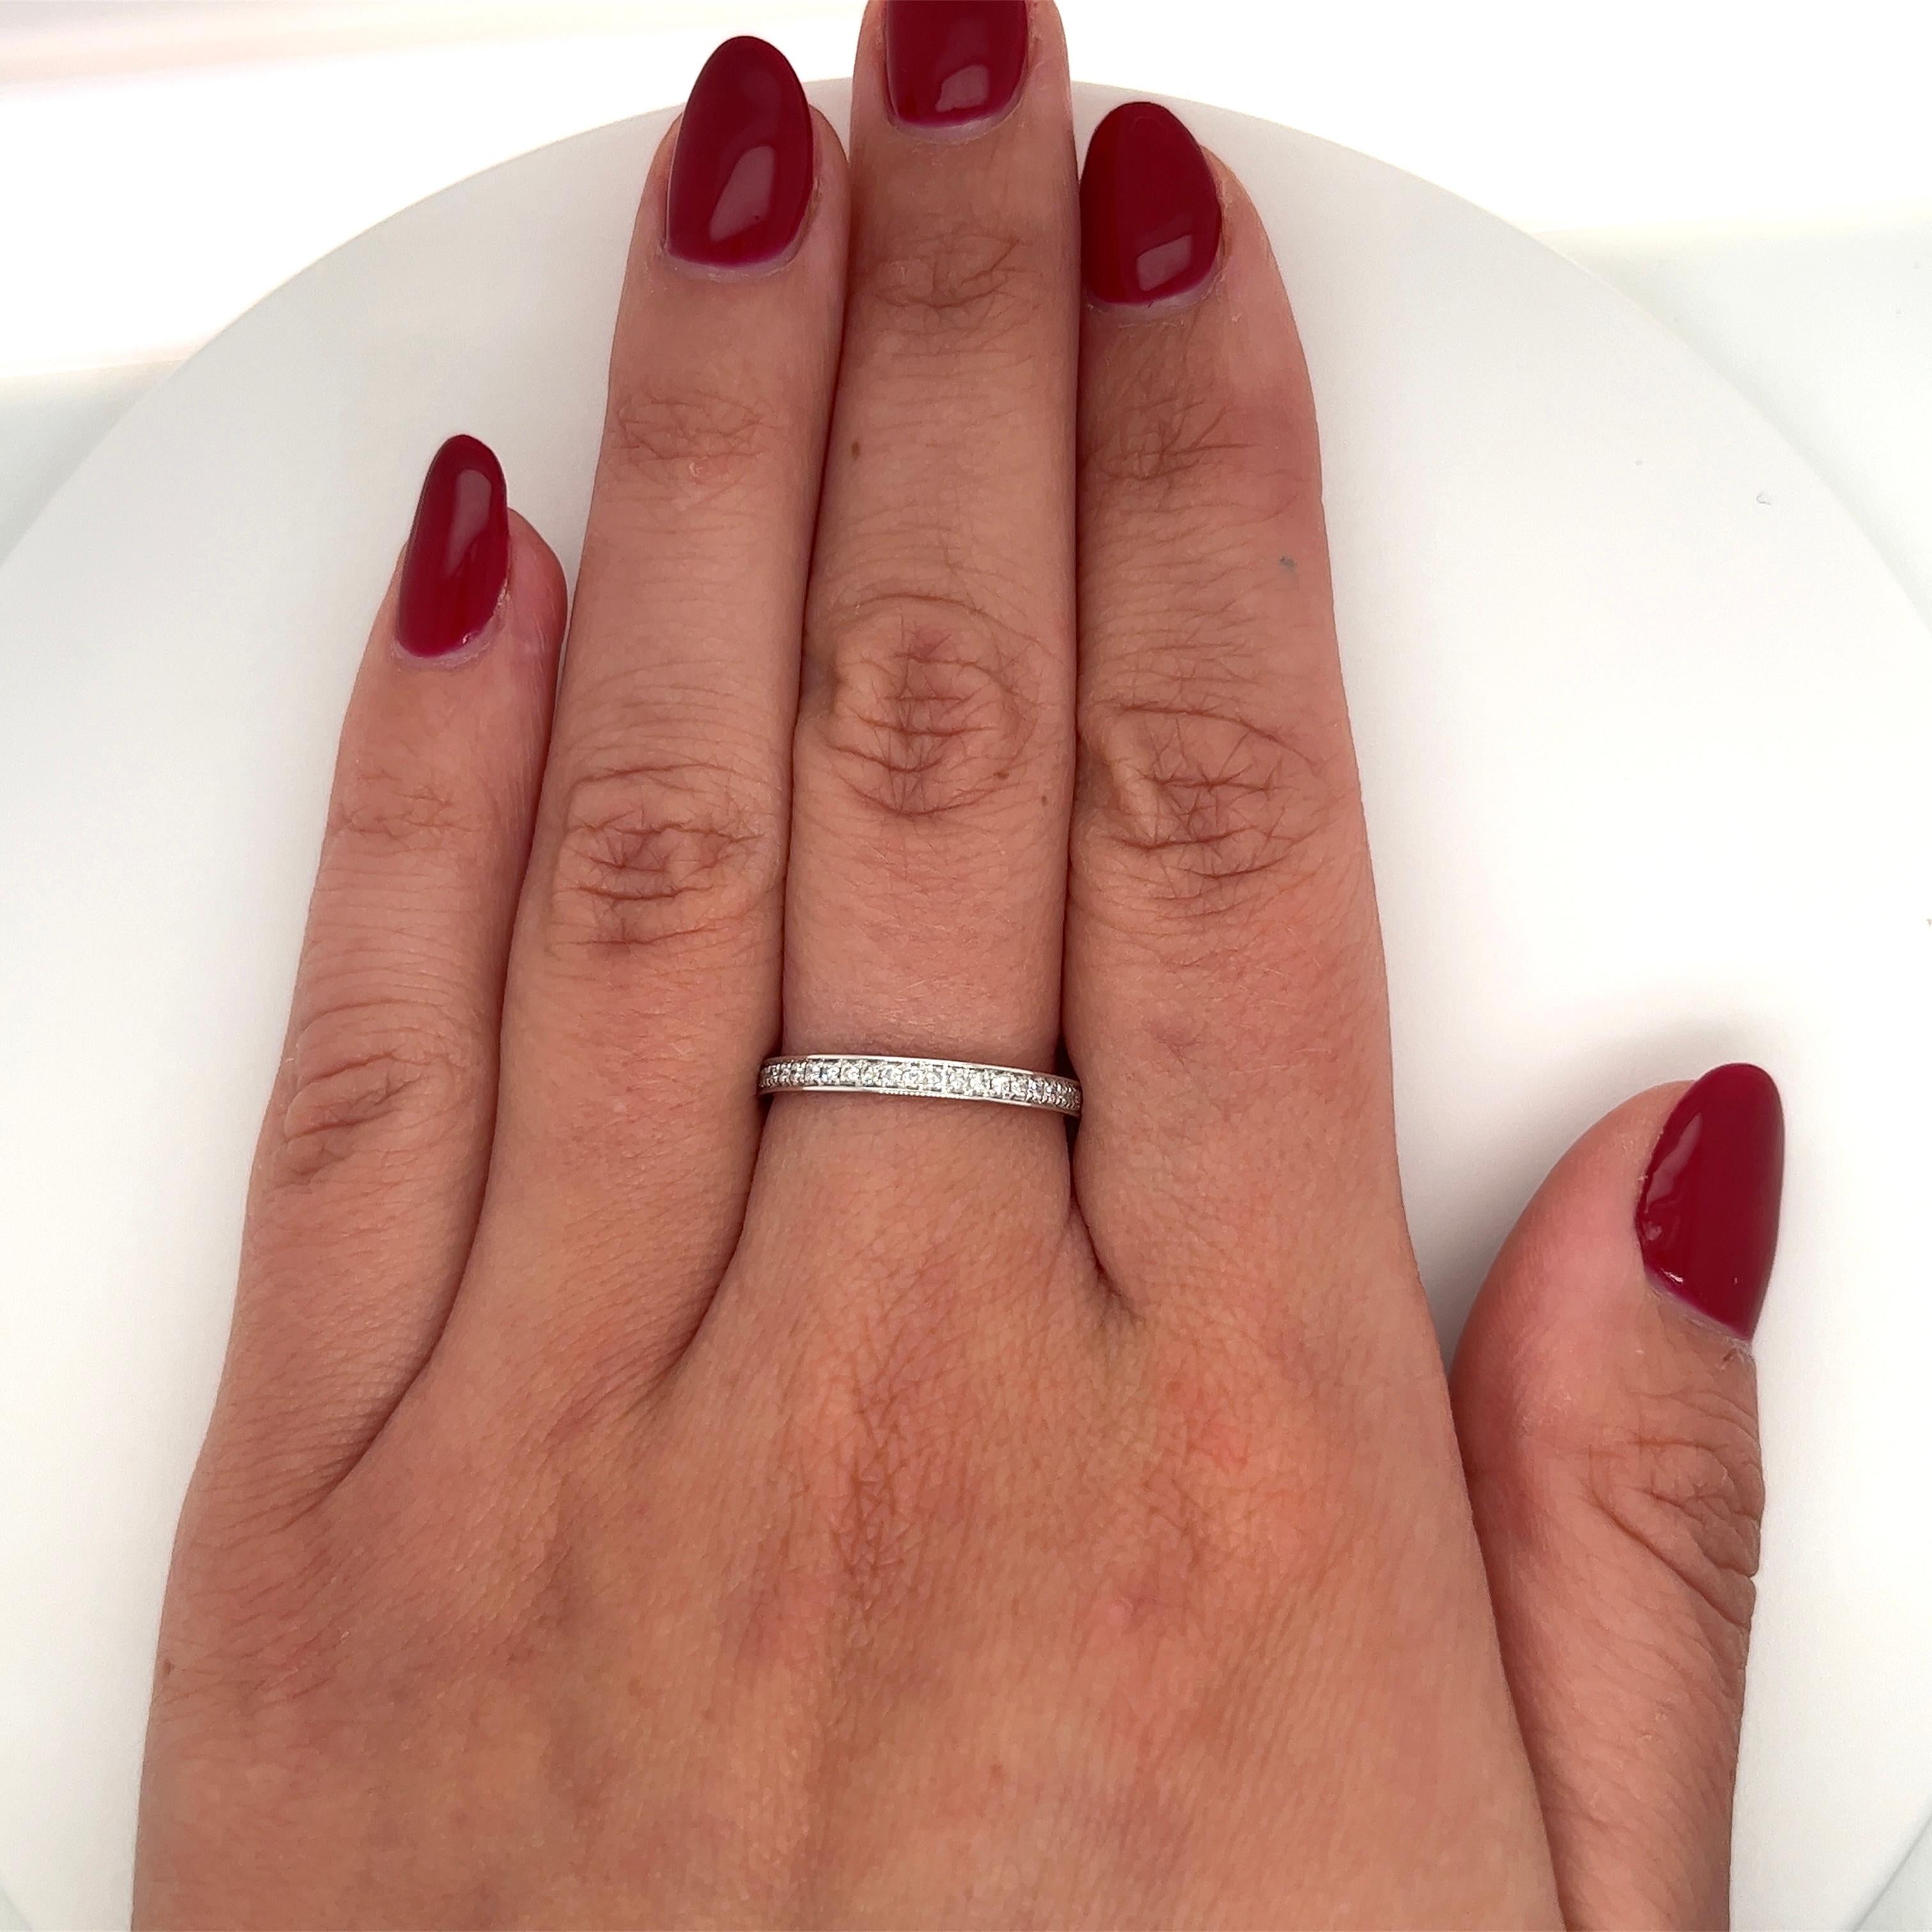 Simple, chic, and full of grace. This natural diamond wedding eternity band is set in smooth 18k white gold that glides on the finger like butter. Double rhodium plated for optimal brilliance and sparkle. 

Certificate of appraisal included upon